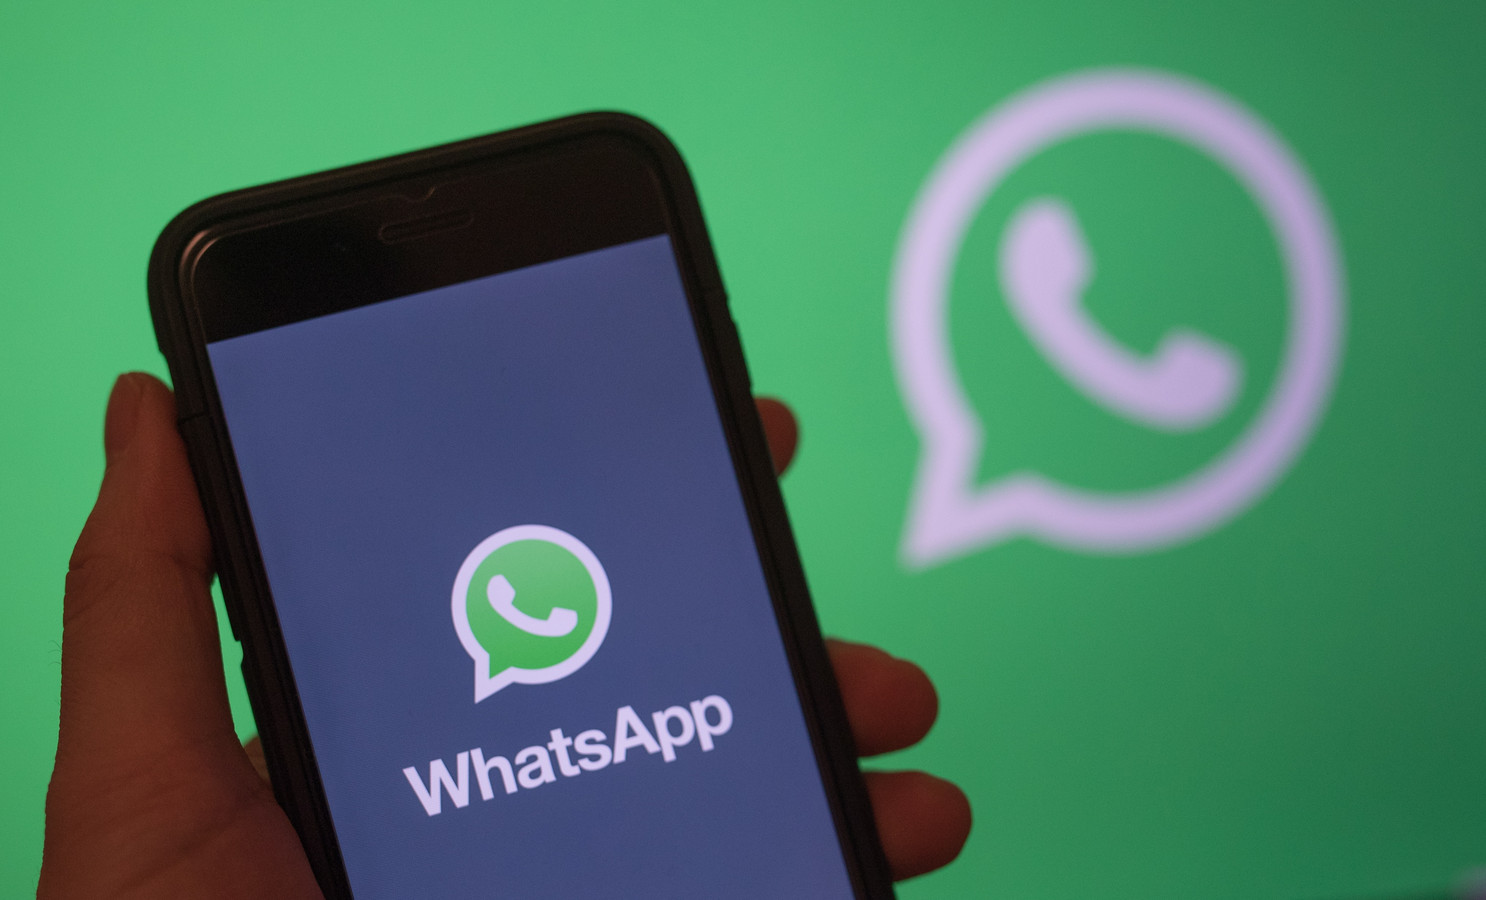 WhatsApp Number Verification Assistant is useful